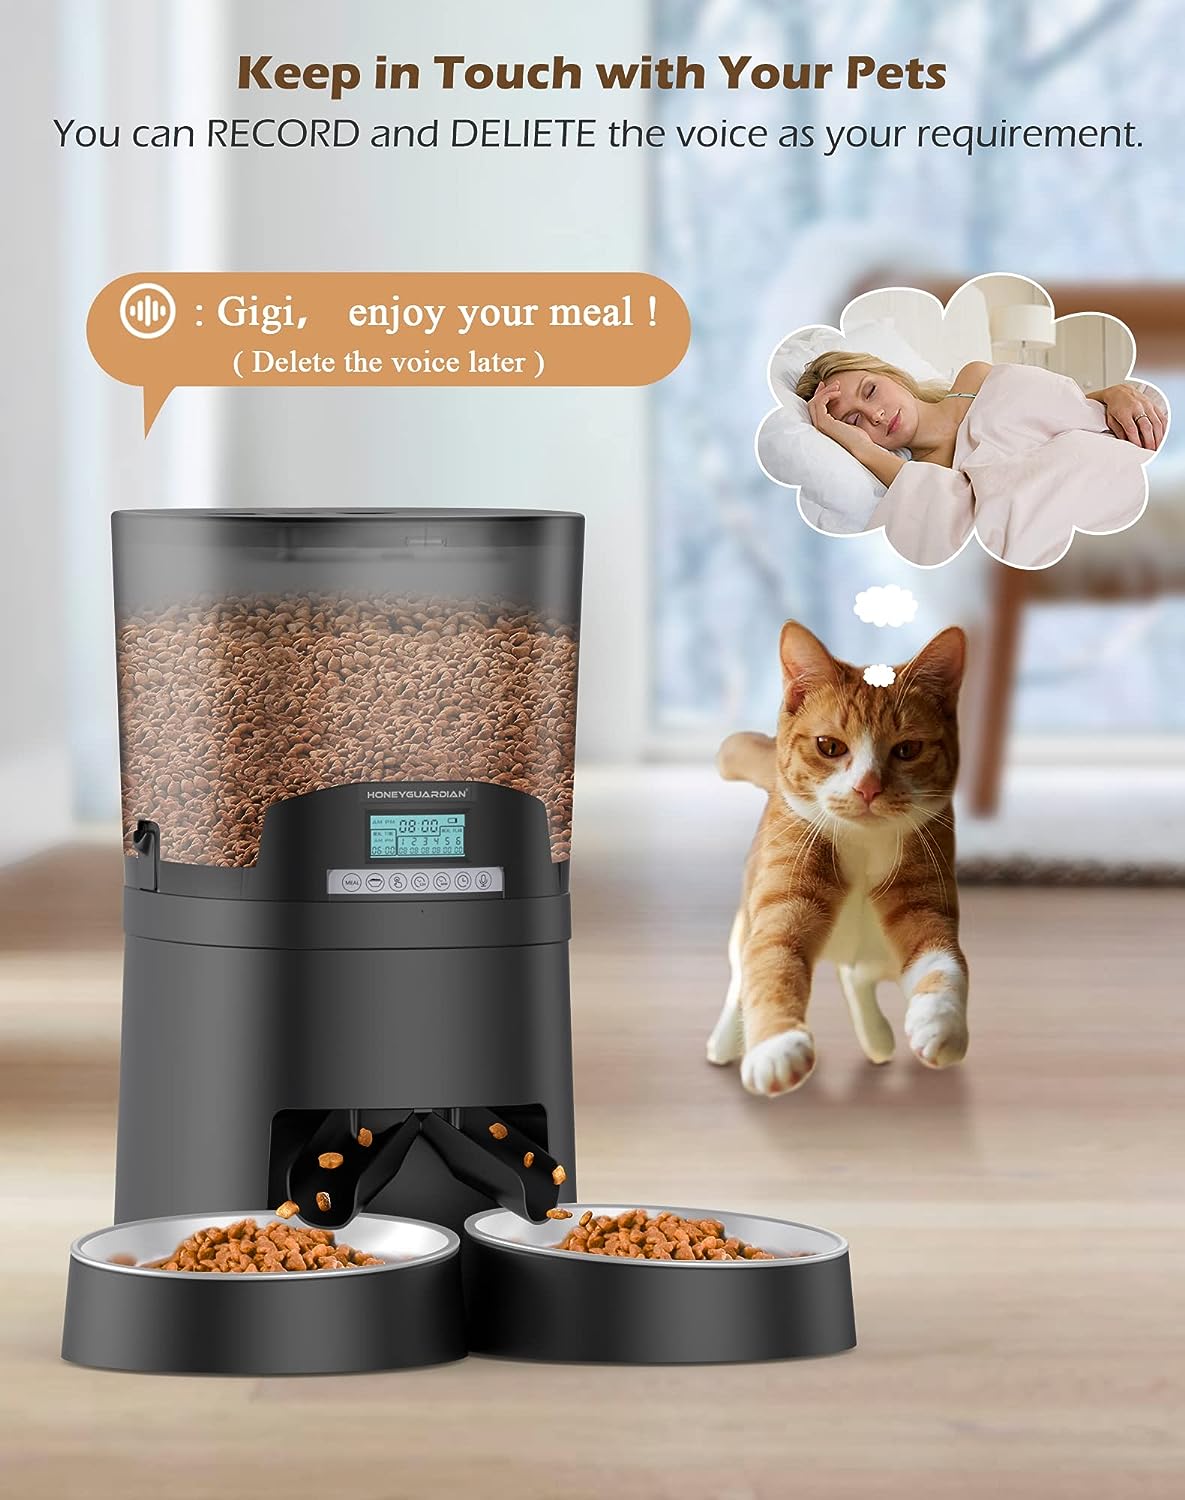 You are currently viewing HoneyGuaridan Automatic Cat Feeder Review